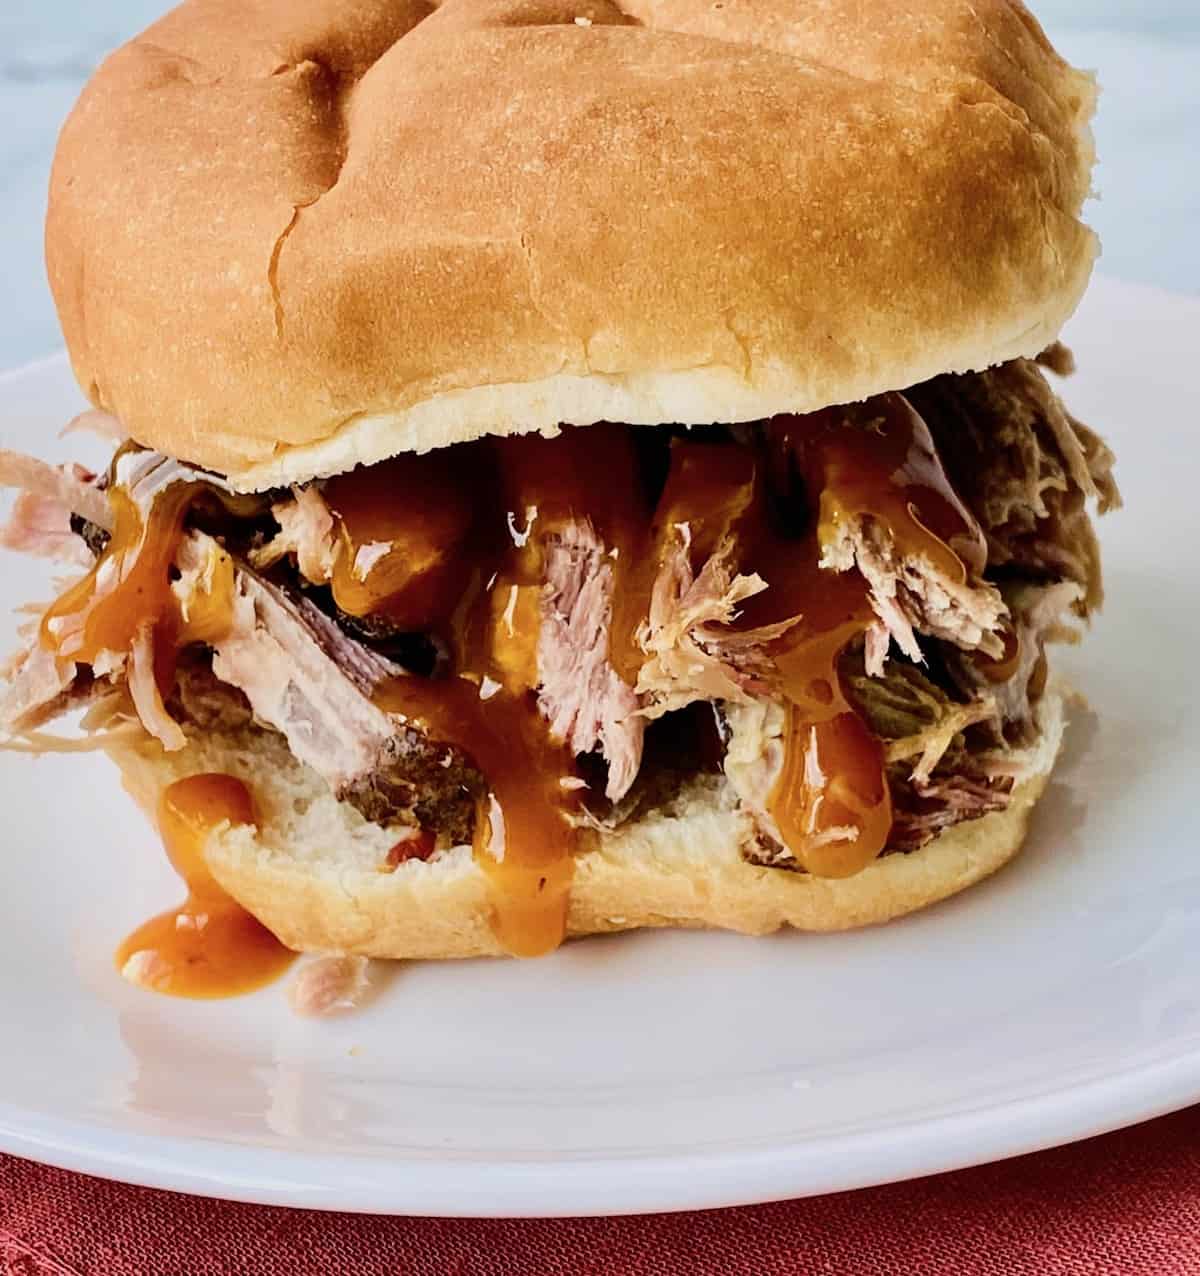 Closeup of Pulled pork with bbq sauce on a bun.